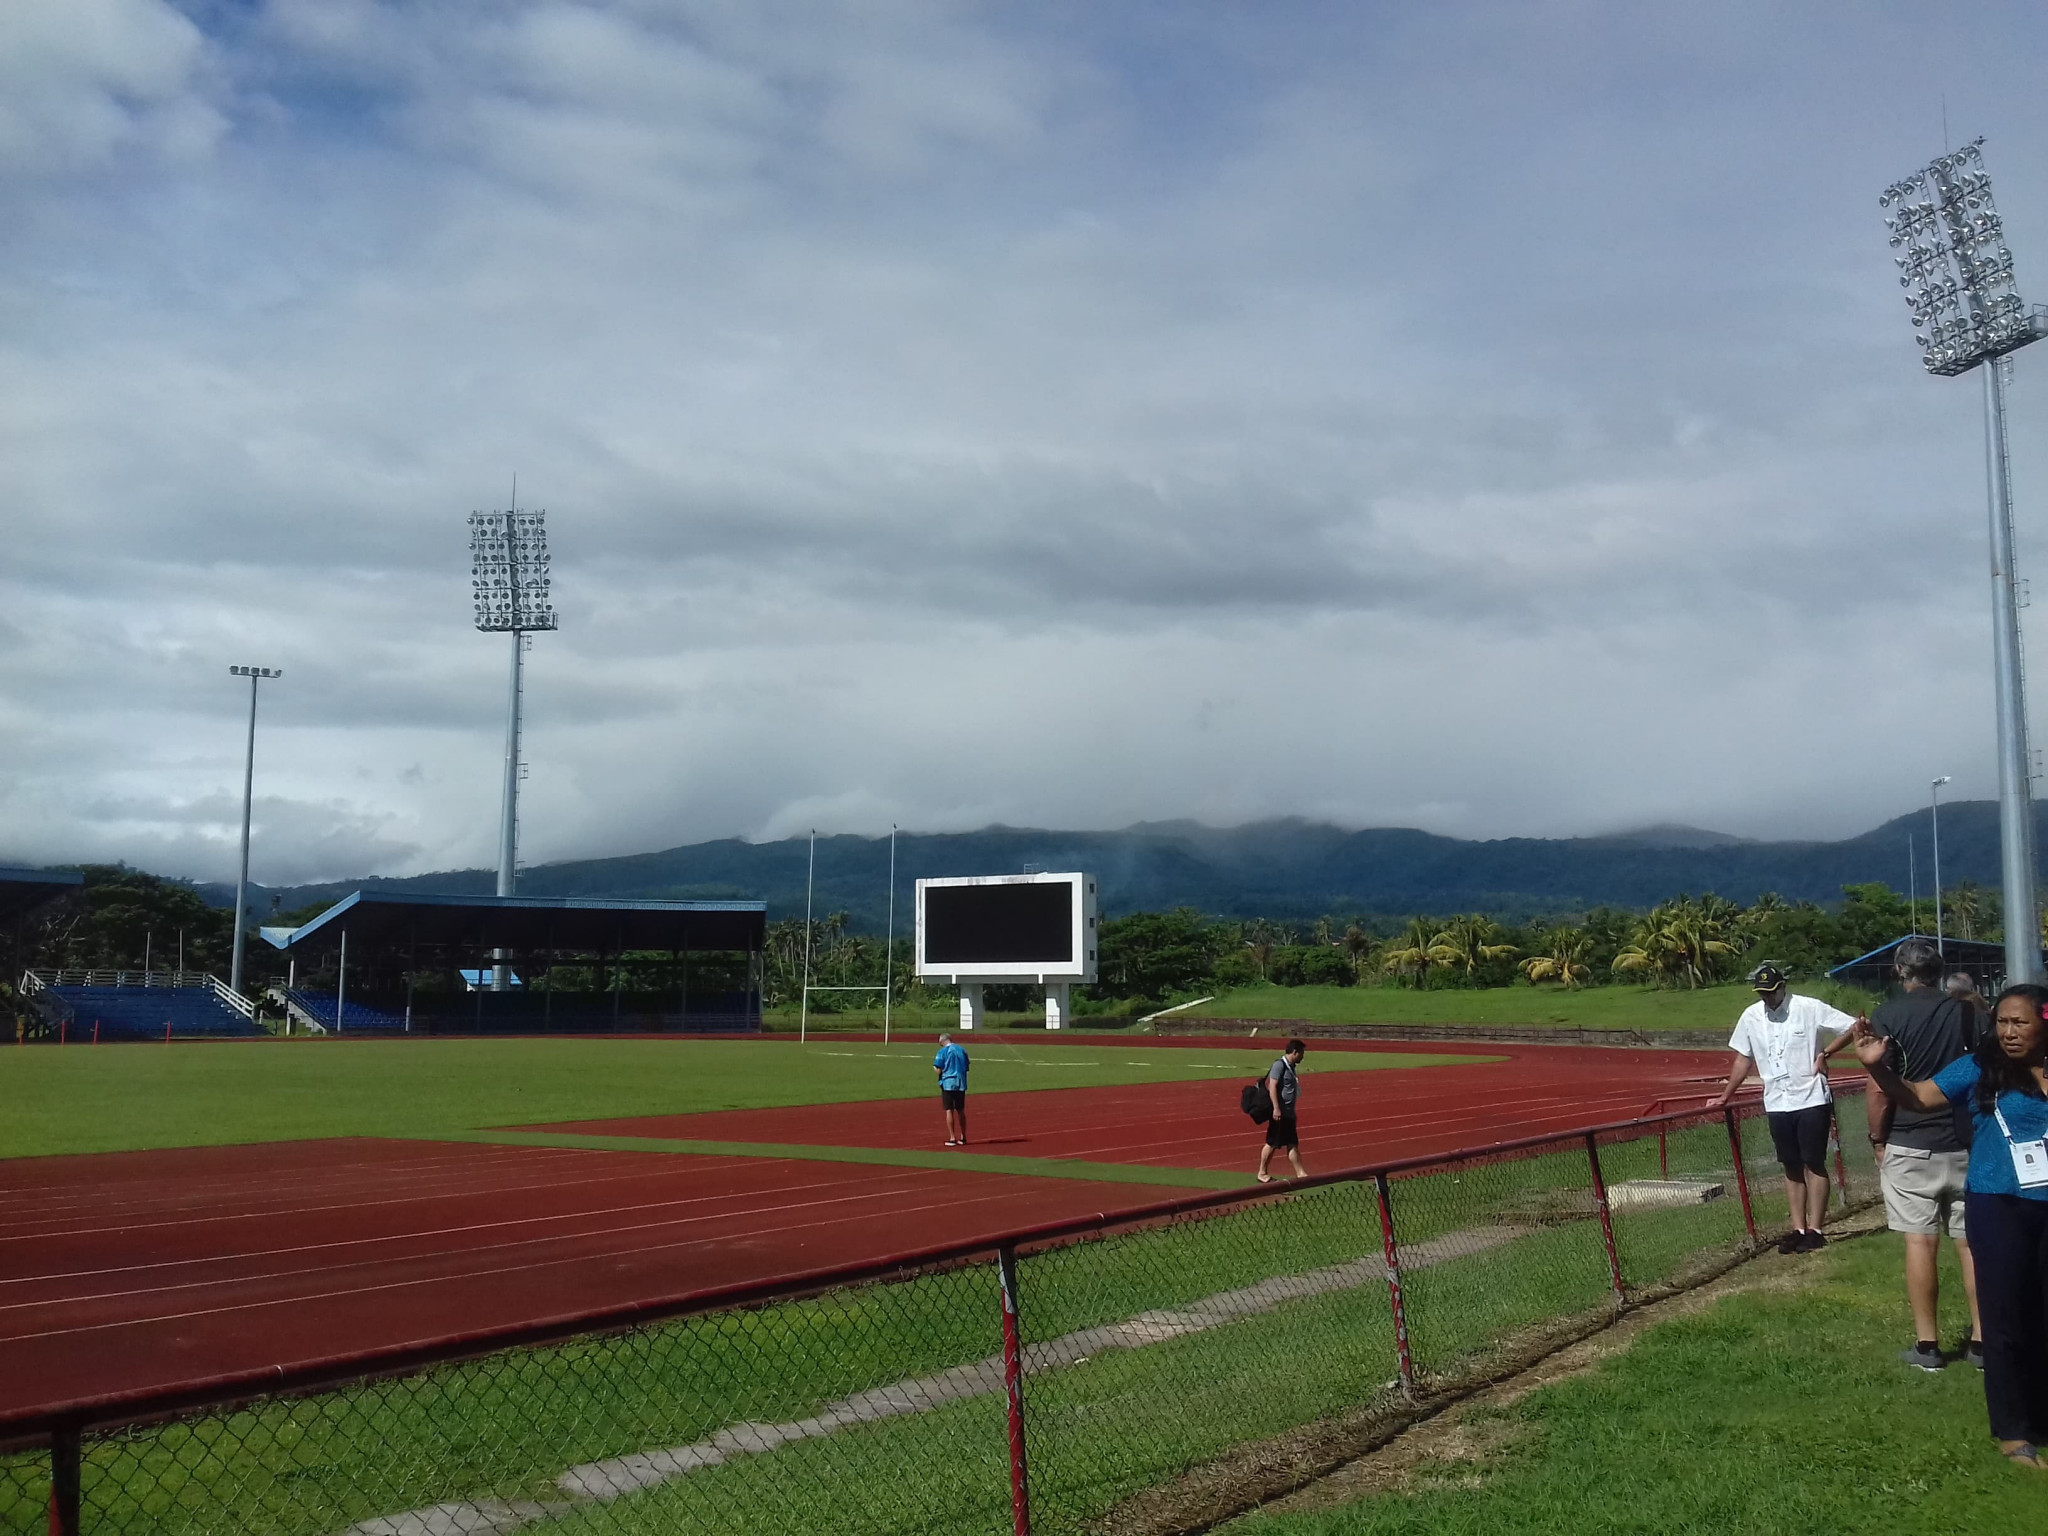 Apia Park on the island of Upolu will host the Opening and Closing Ceremonies of the 2019 Pacific Games ©ITG